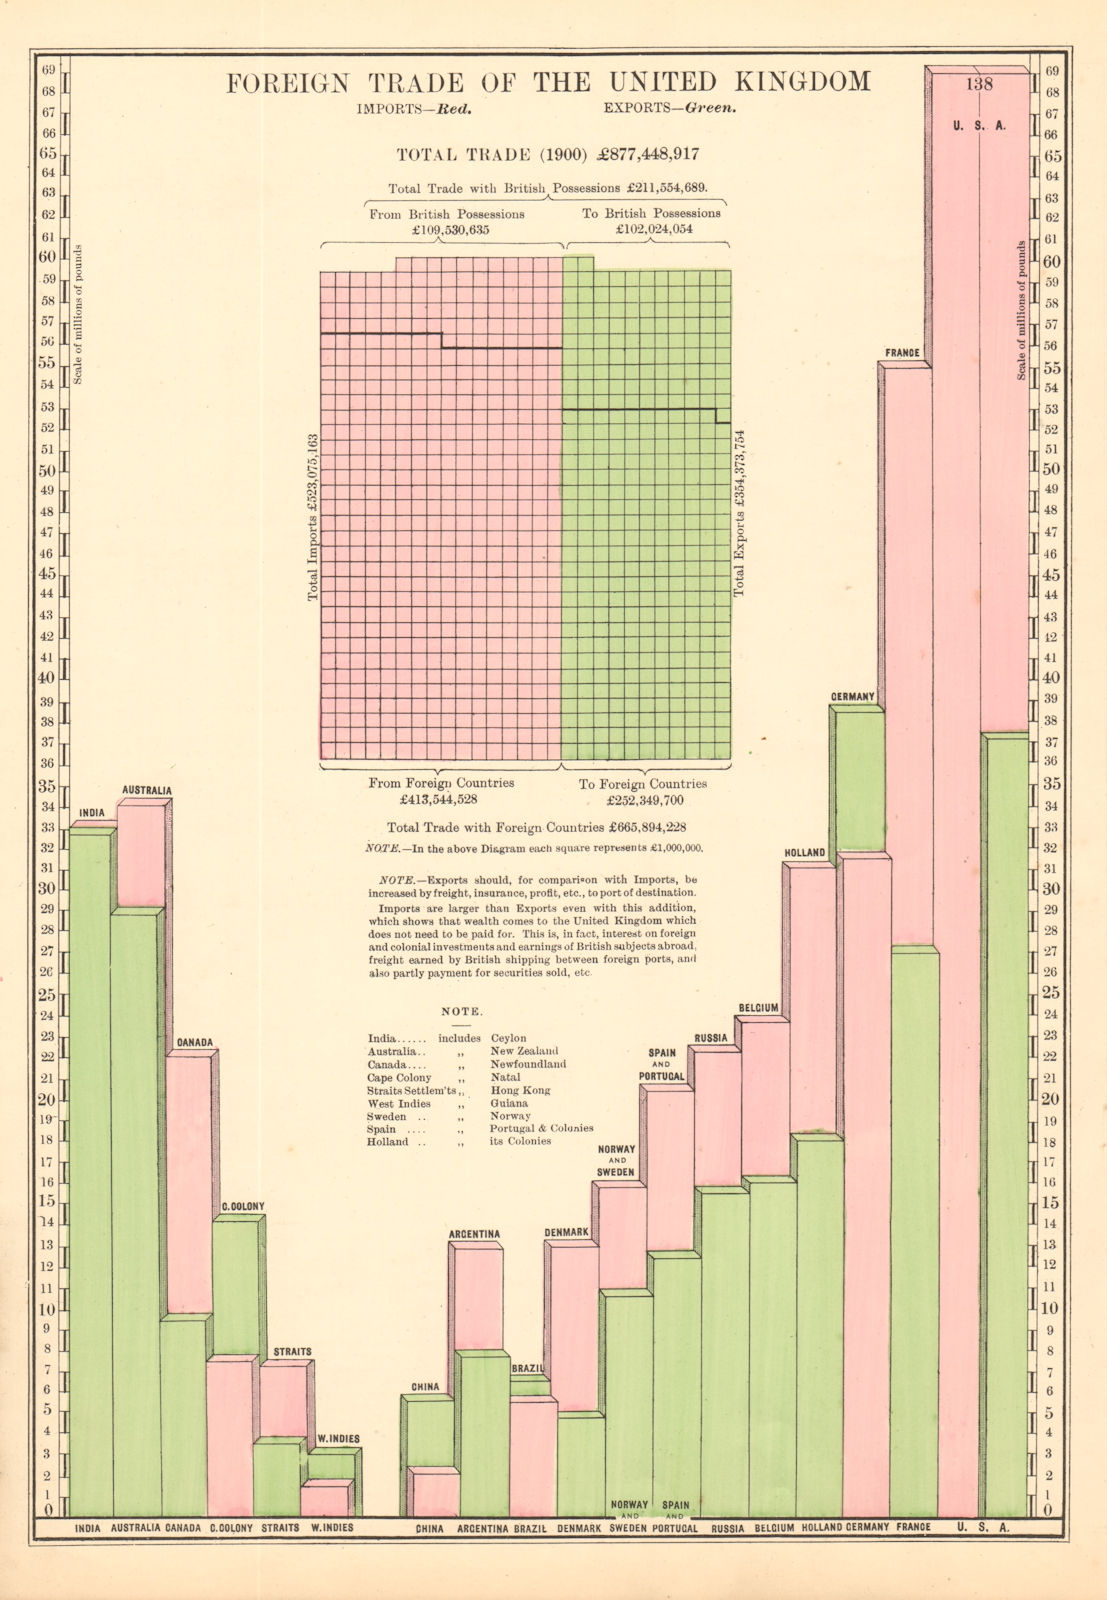 UK FOREIGN TRADE. Imports (pink) Exports (green) by country. BACON 1904 print